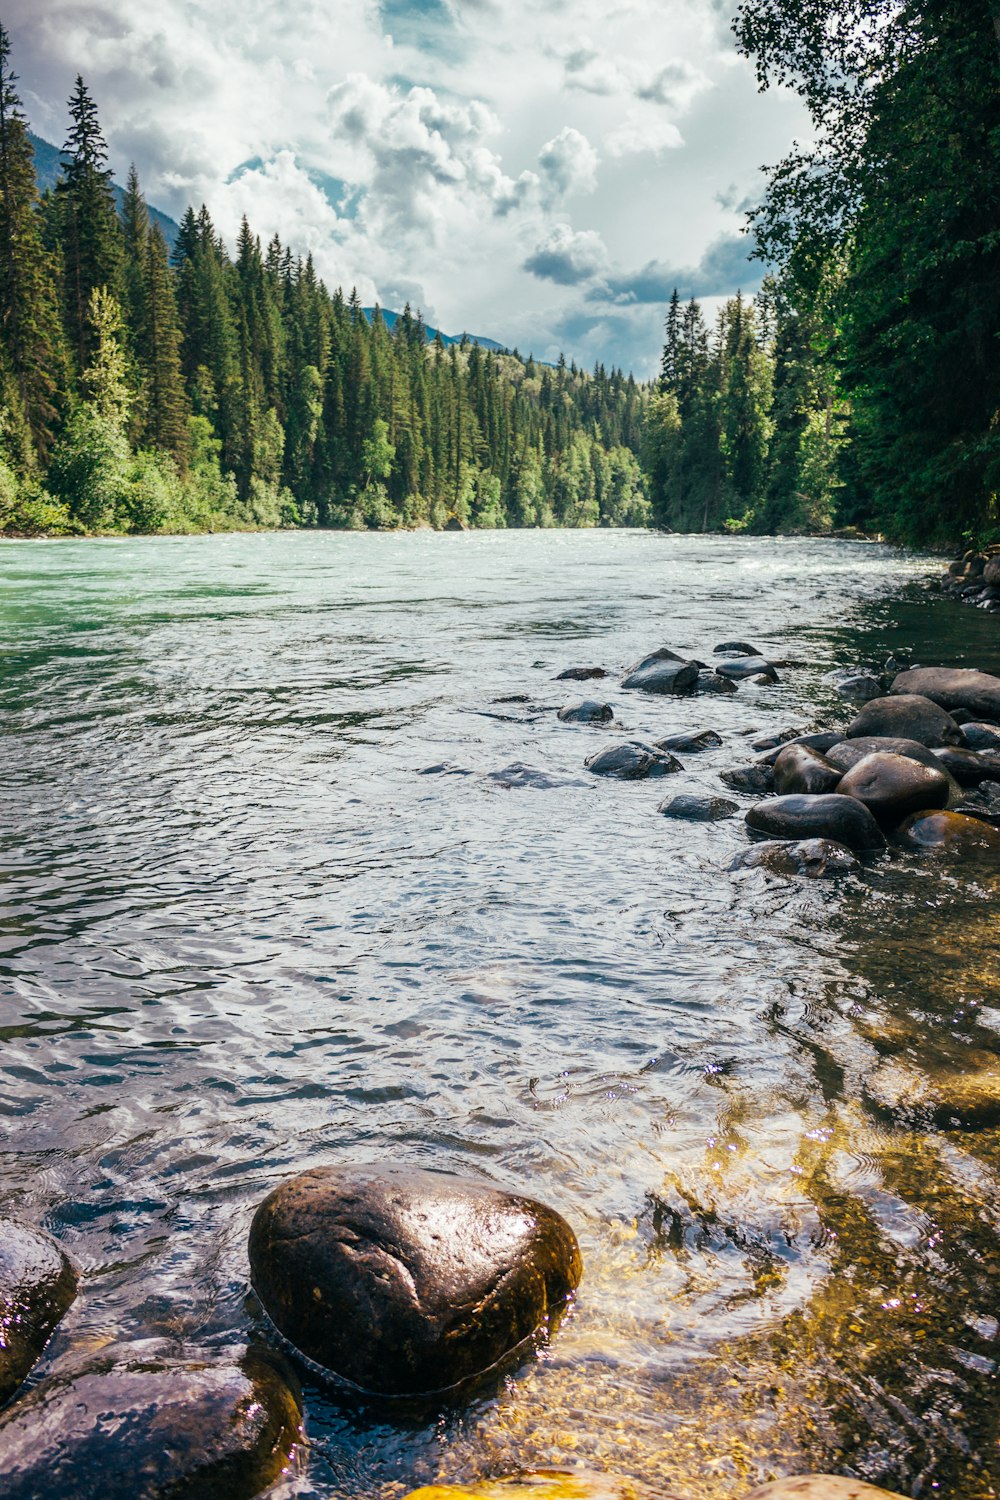 Forest River Pictures  Download Free Images on Unsplash